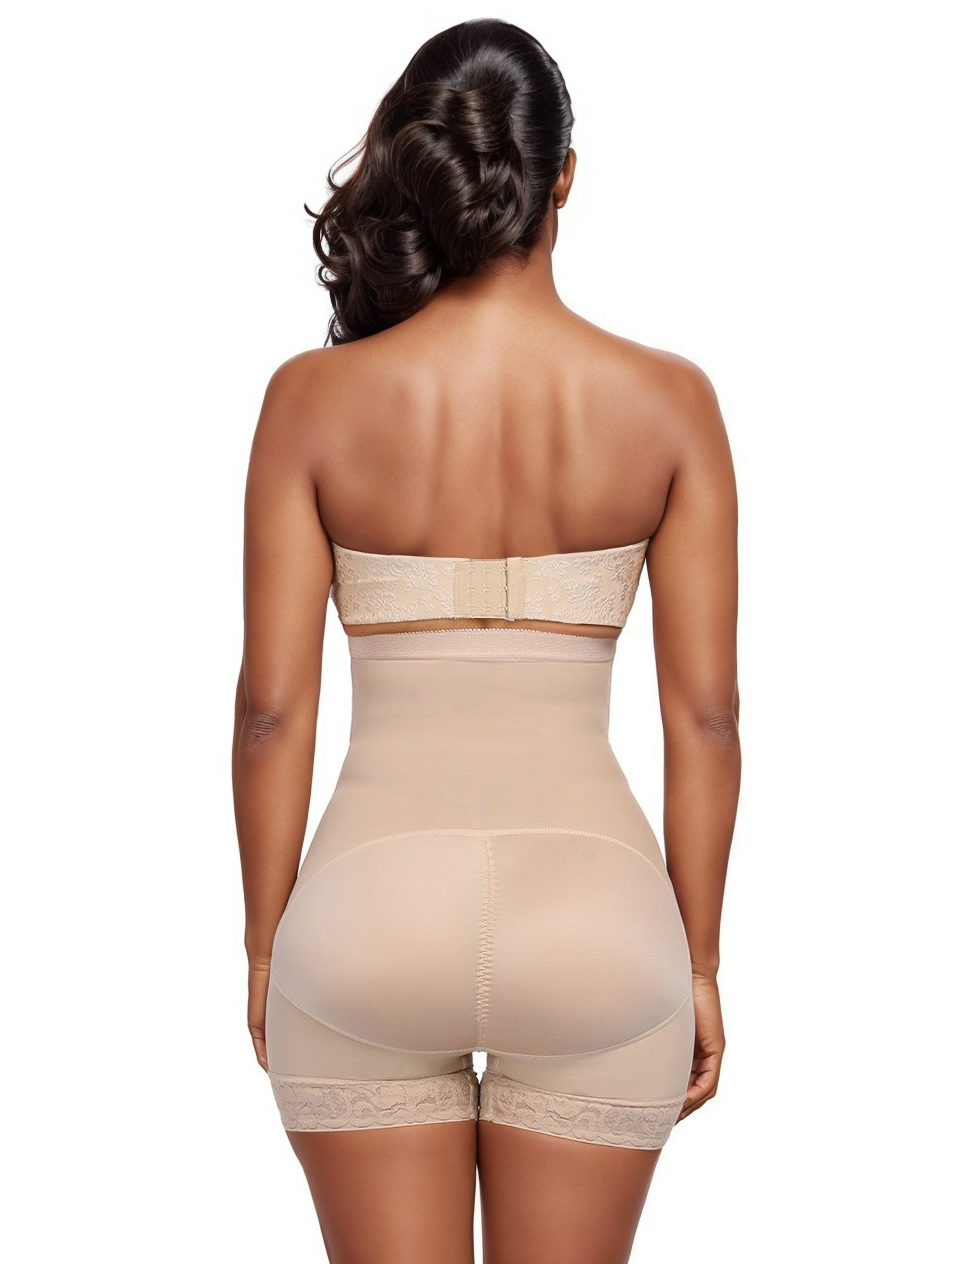 TUMMY Control High Waist Shaper Panties For Order Placement Dm